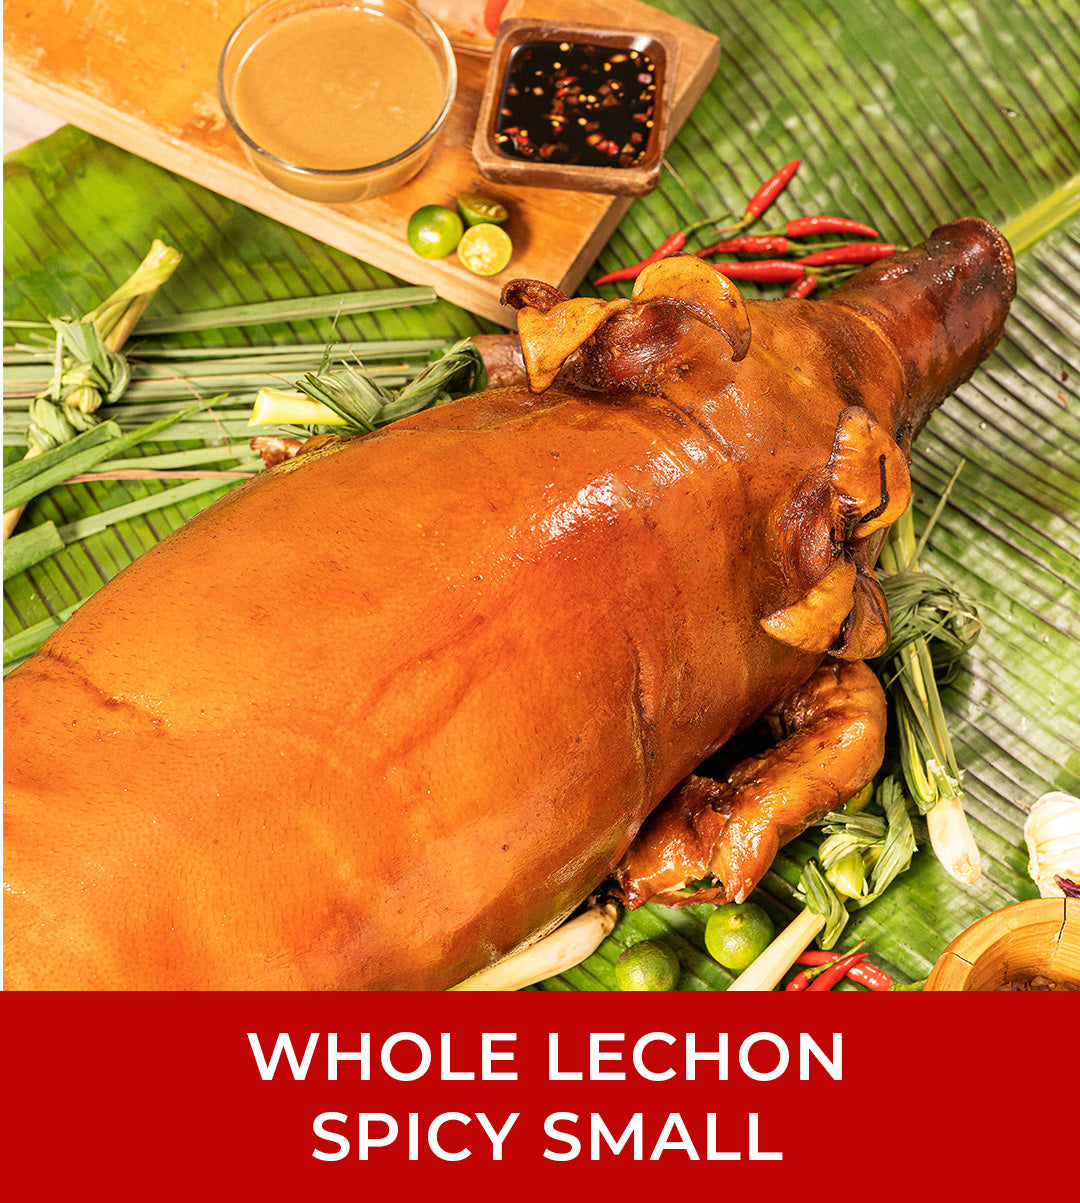 Abub's Spicy Lechon Pick up (Small)